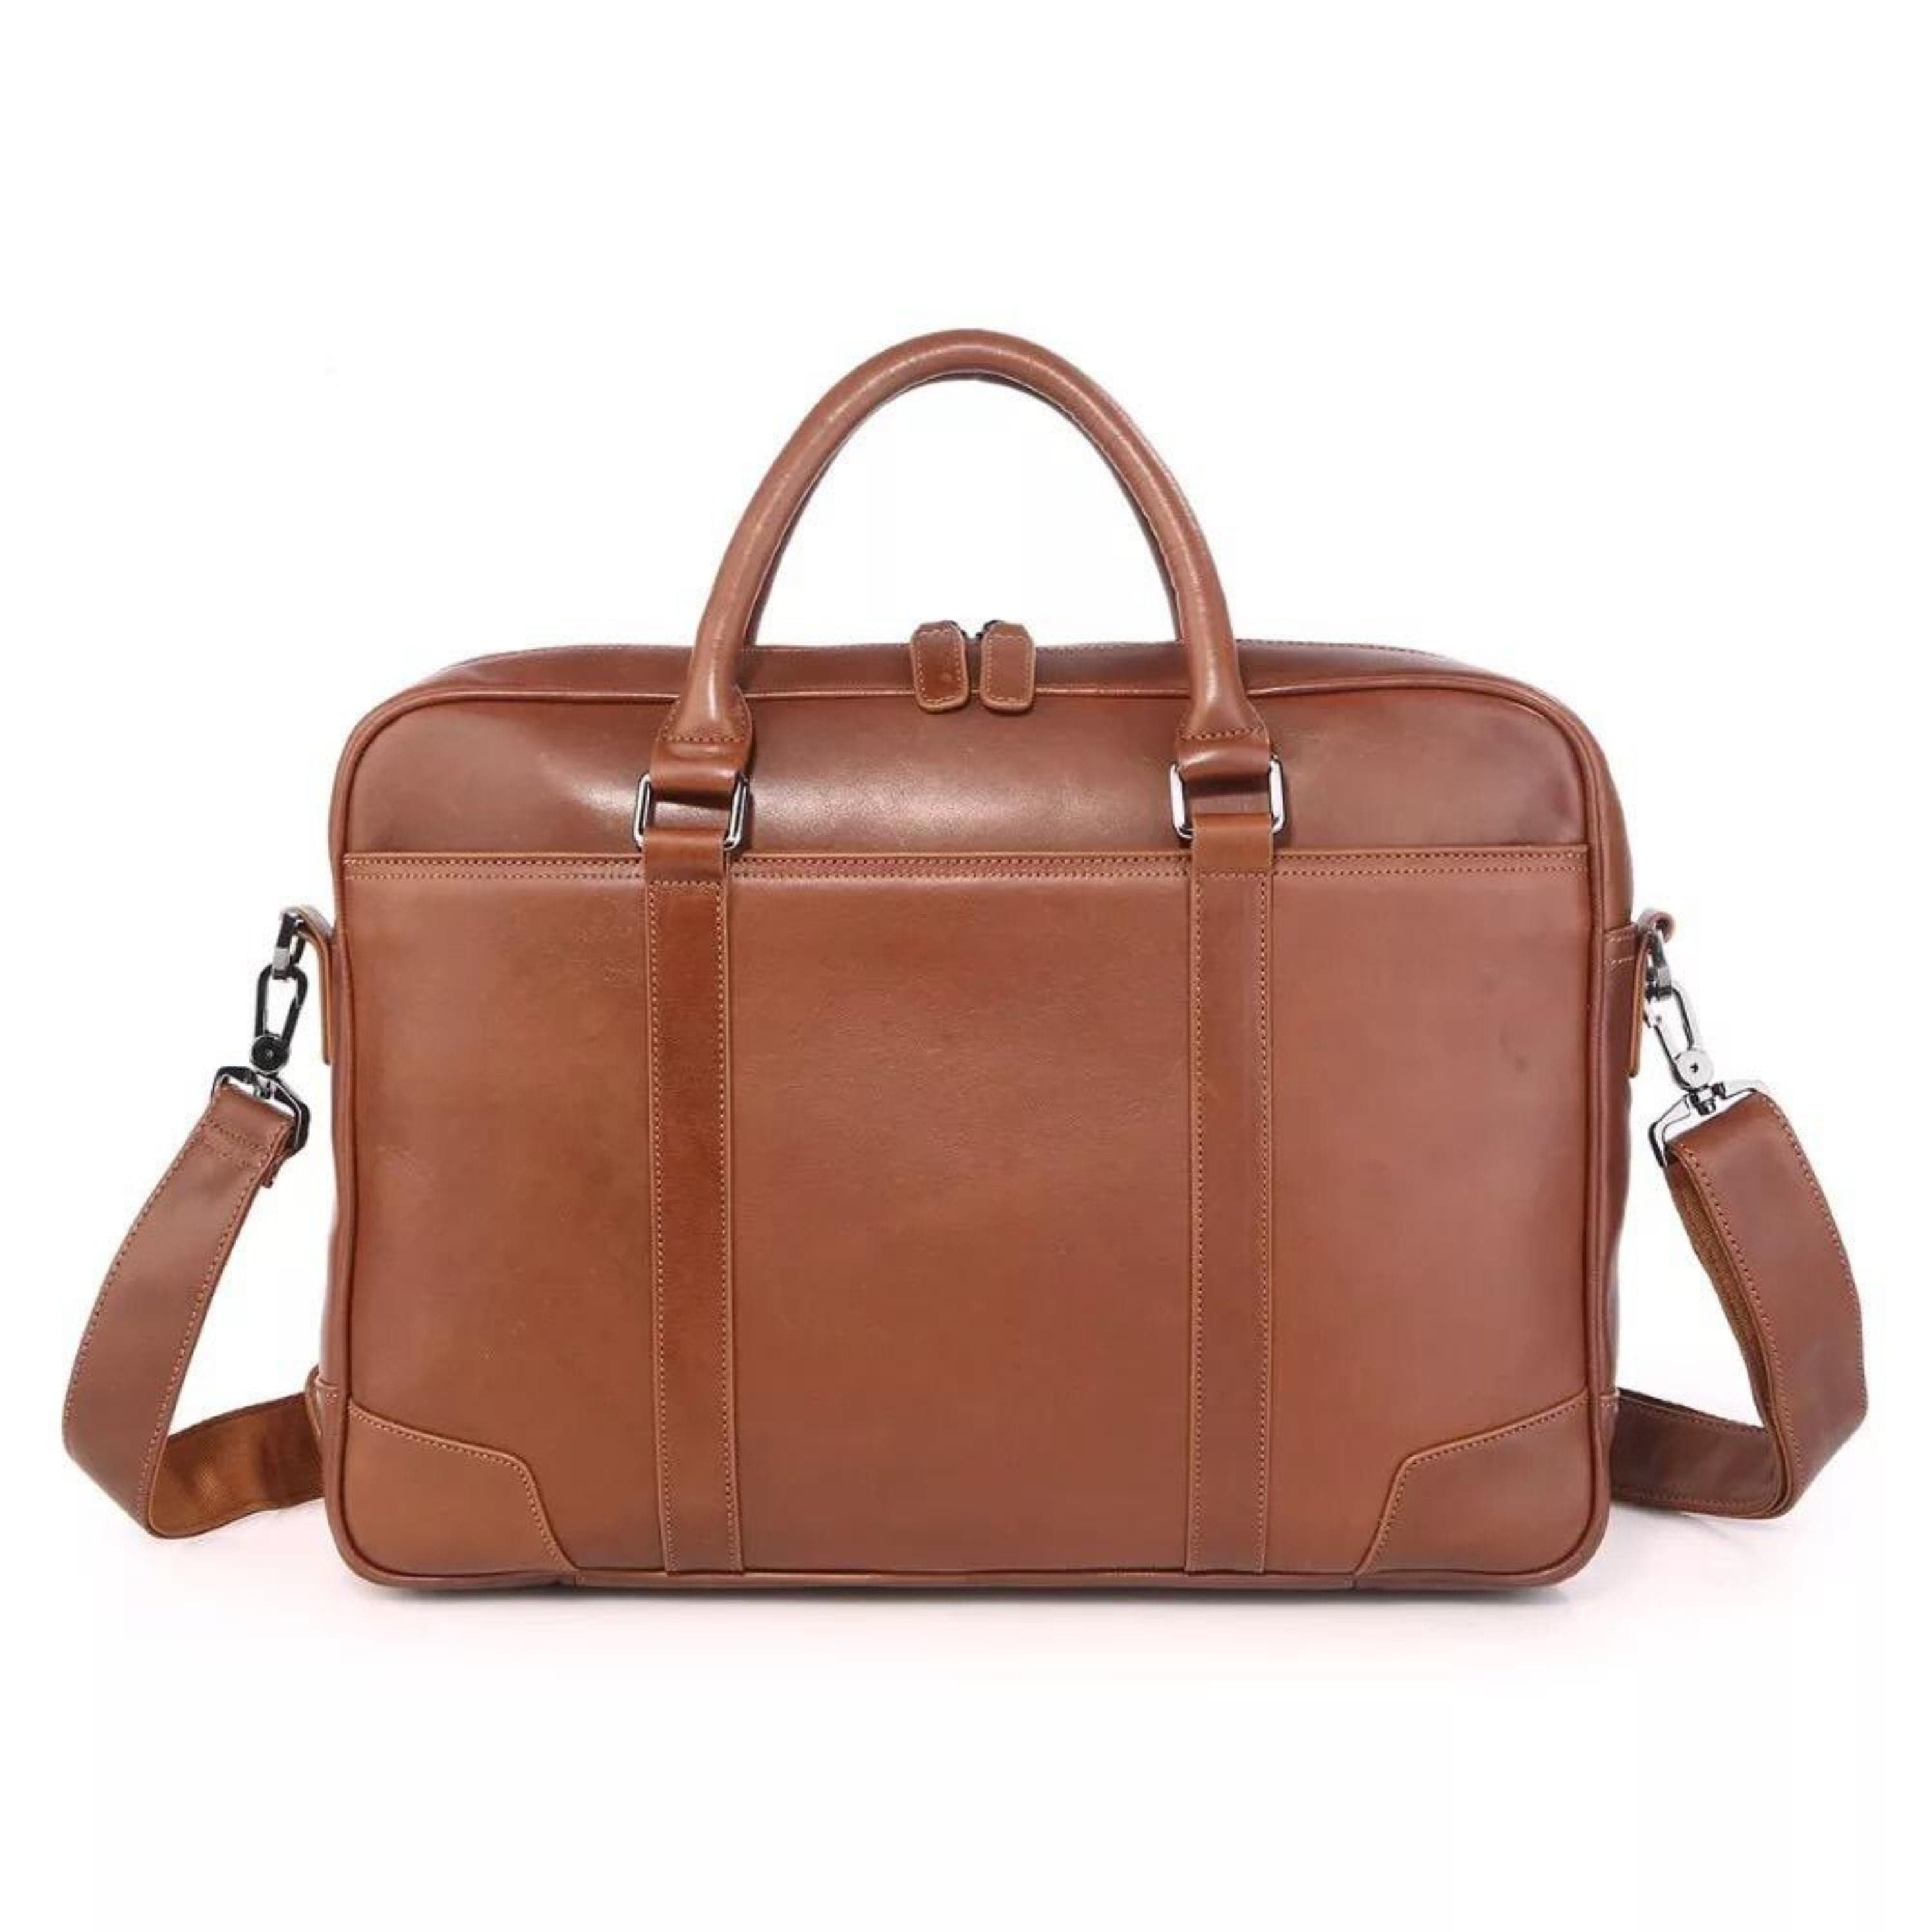 kinnoti LAPTOP BAGS Tan Genuine Leather Laptop Bag For Mac book Pro 13- 14 Inches